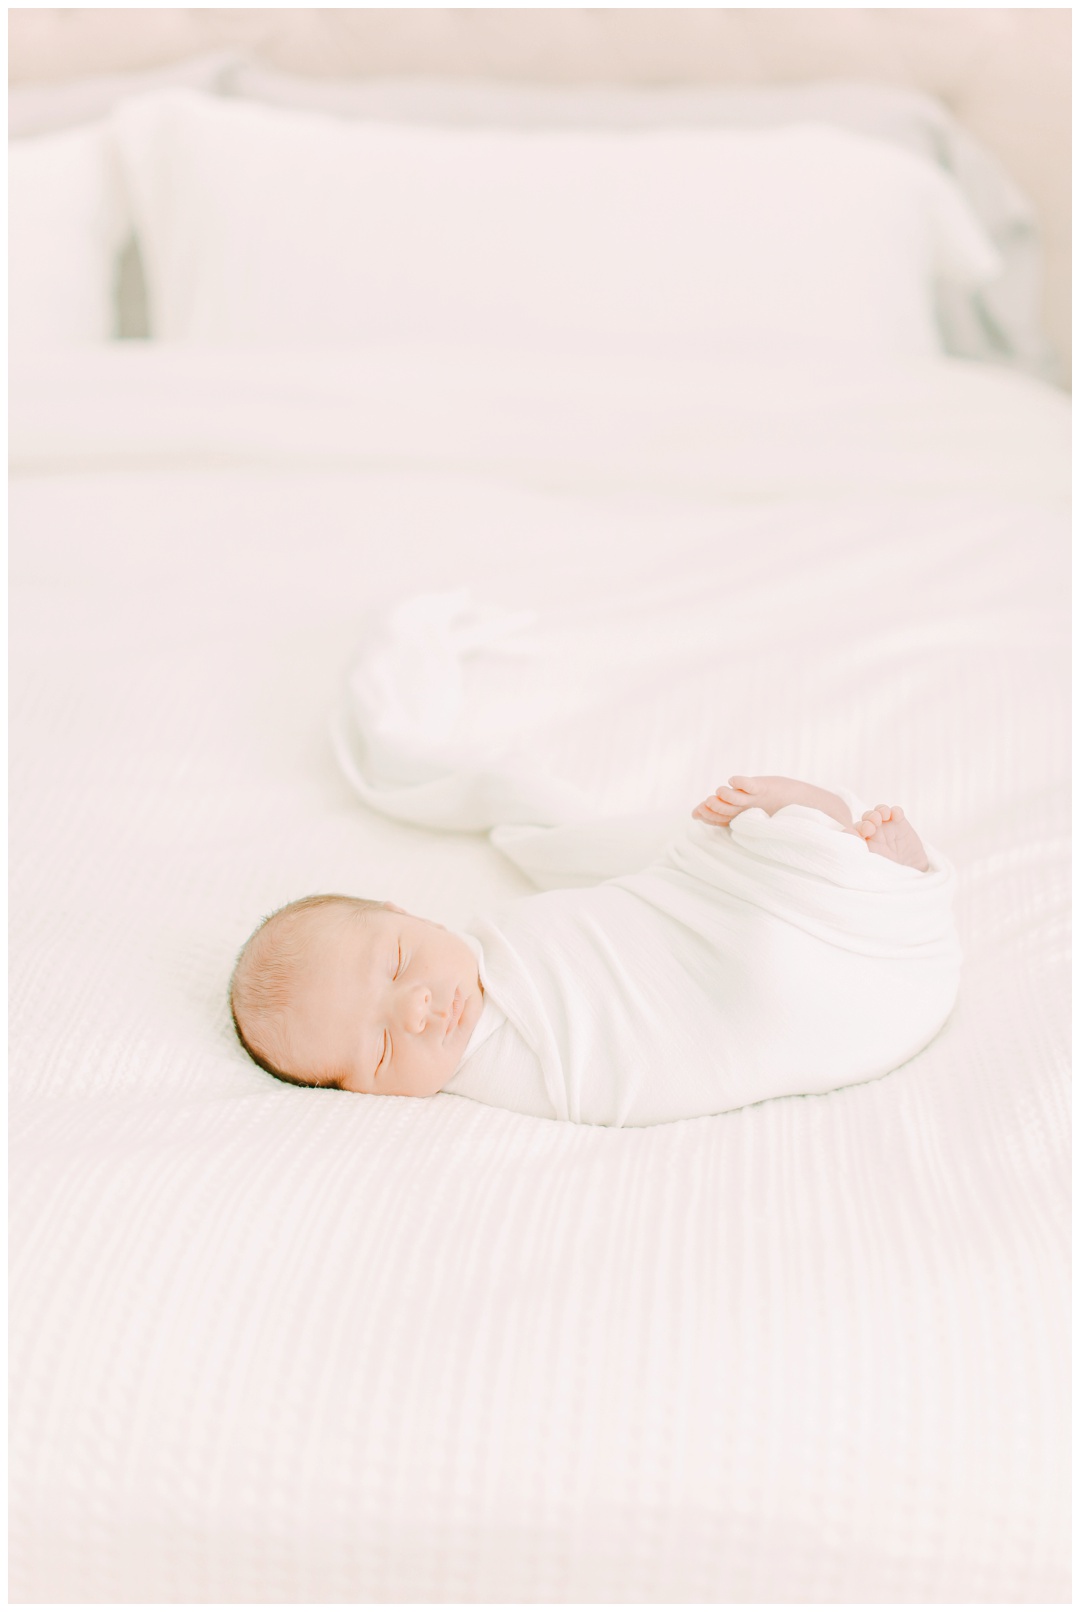 The_Moore's_Family_Newport_Beach_Lifestyle_Family_Photographer_Orange_County_Family_Photography_Cori_Kleckner_Photography_Orange_County_Newborn_Photographer_Family_Photos_Session__1396.jpg